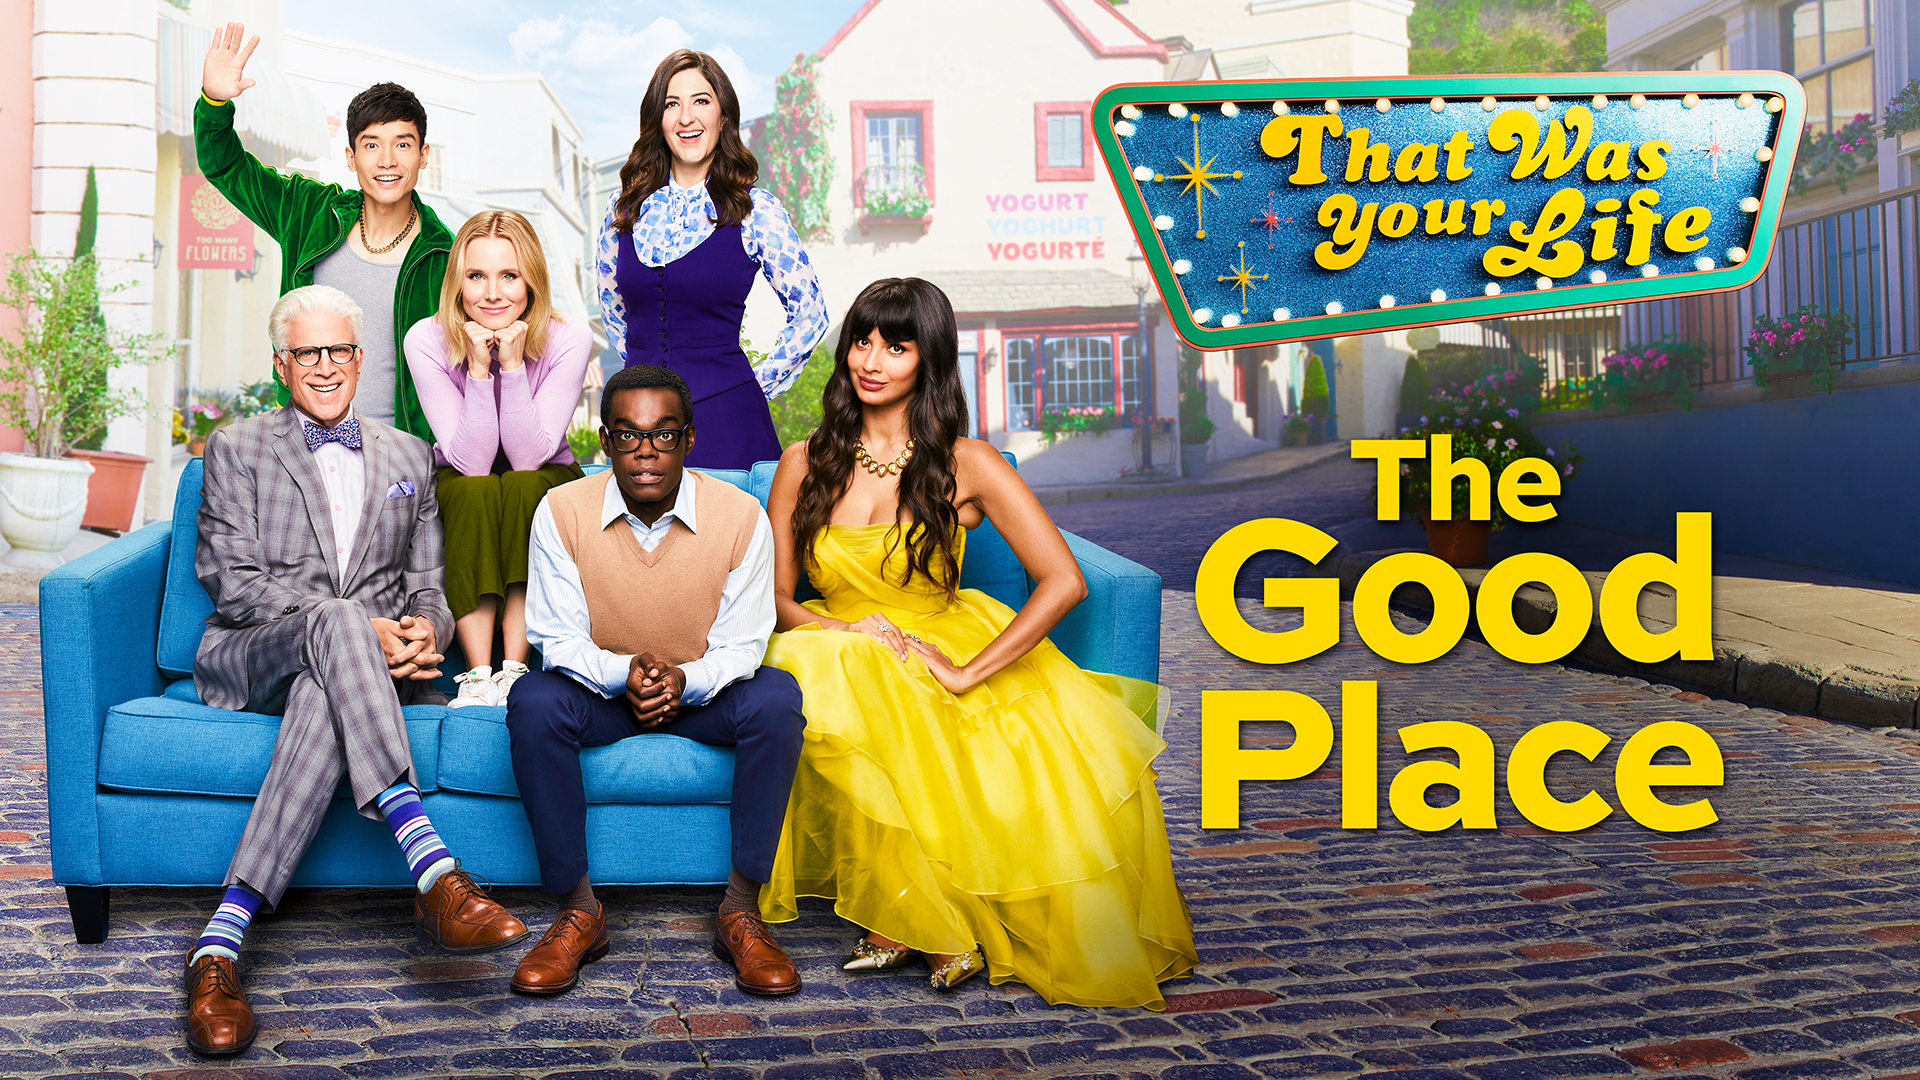 Watch The Good Place Episodes at NBC.com1920 x 1080